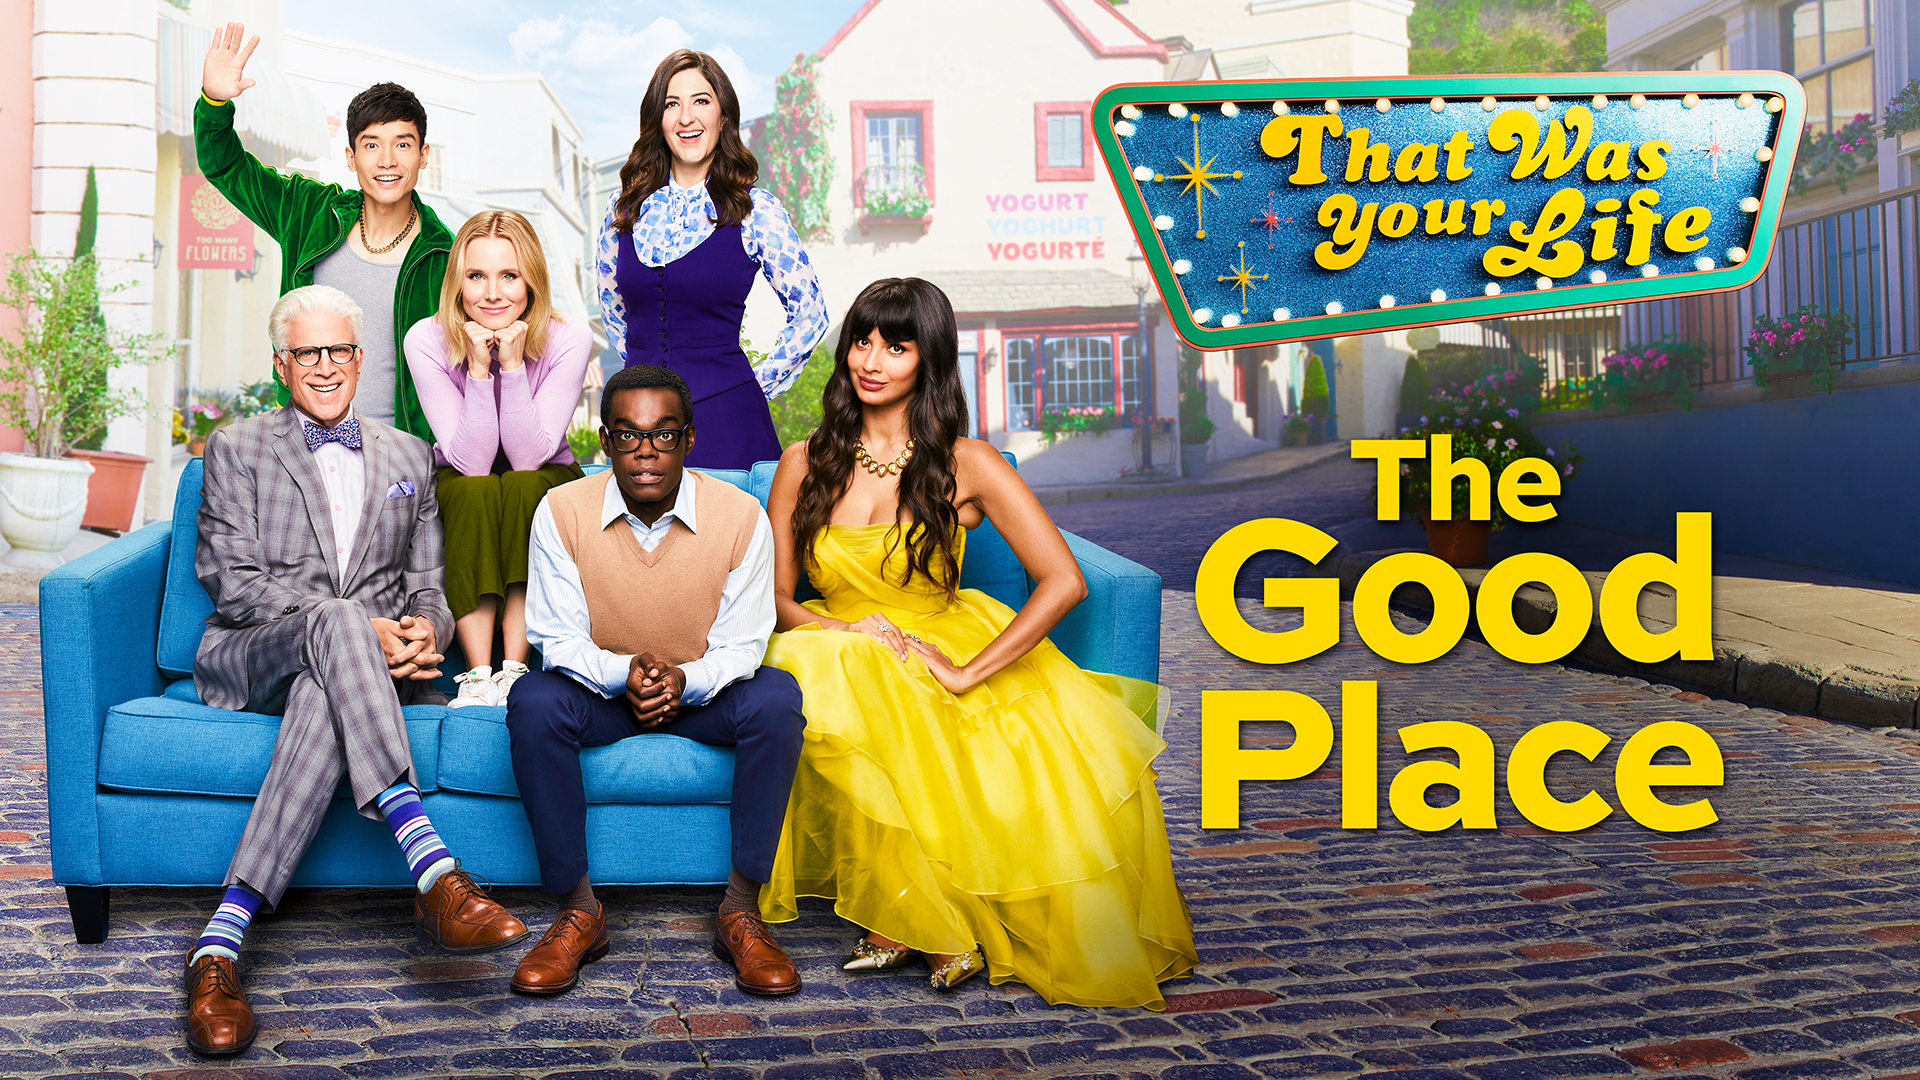 Watch The Good Place Episodes at NBC.com1920 x 1080